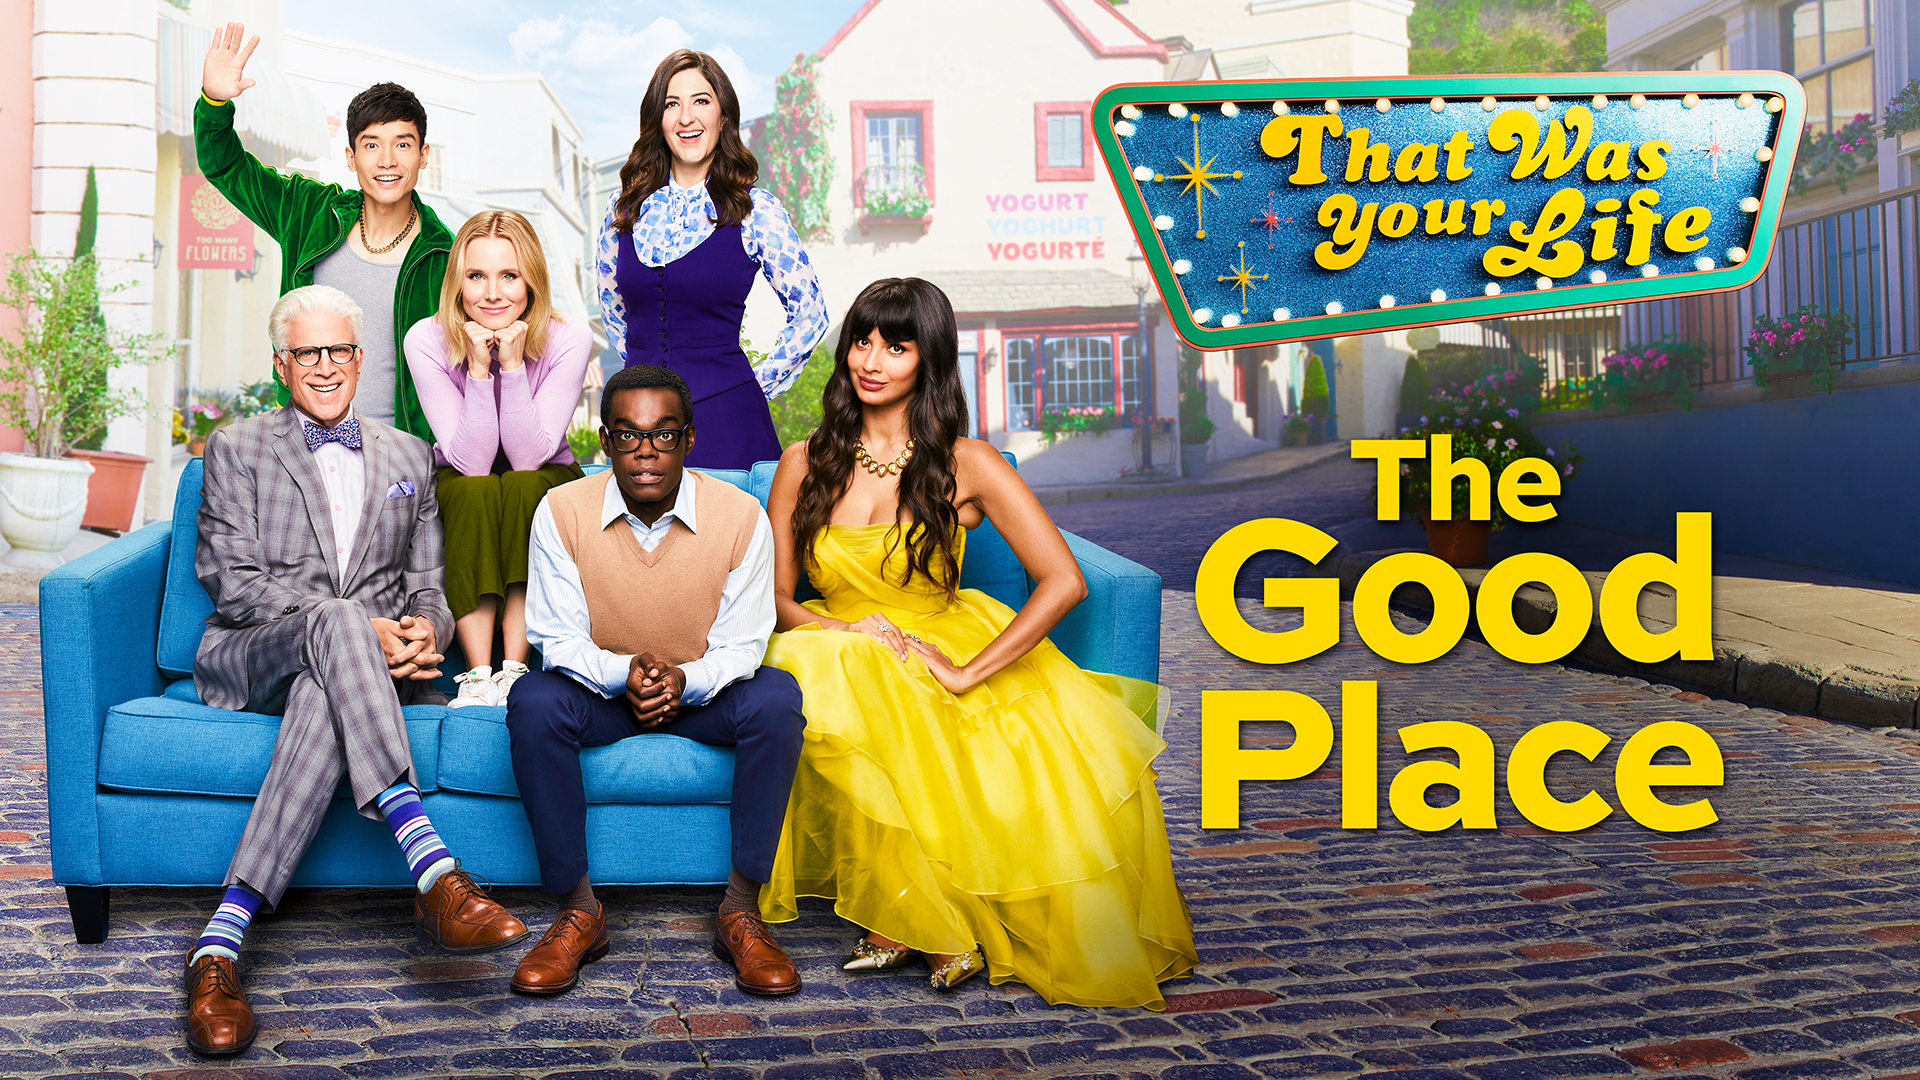 Watch The Good Place Episodes at NBC.com1920 x 1080